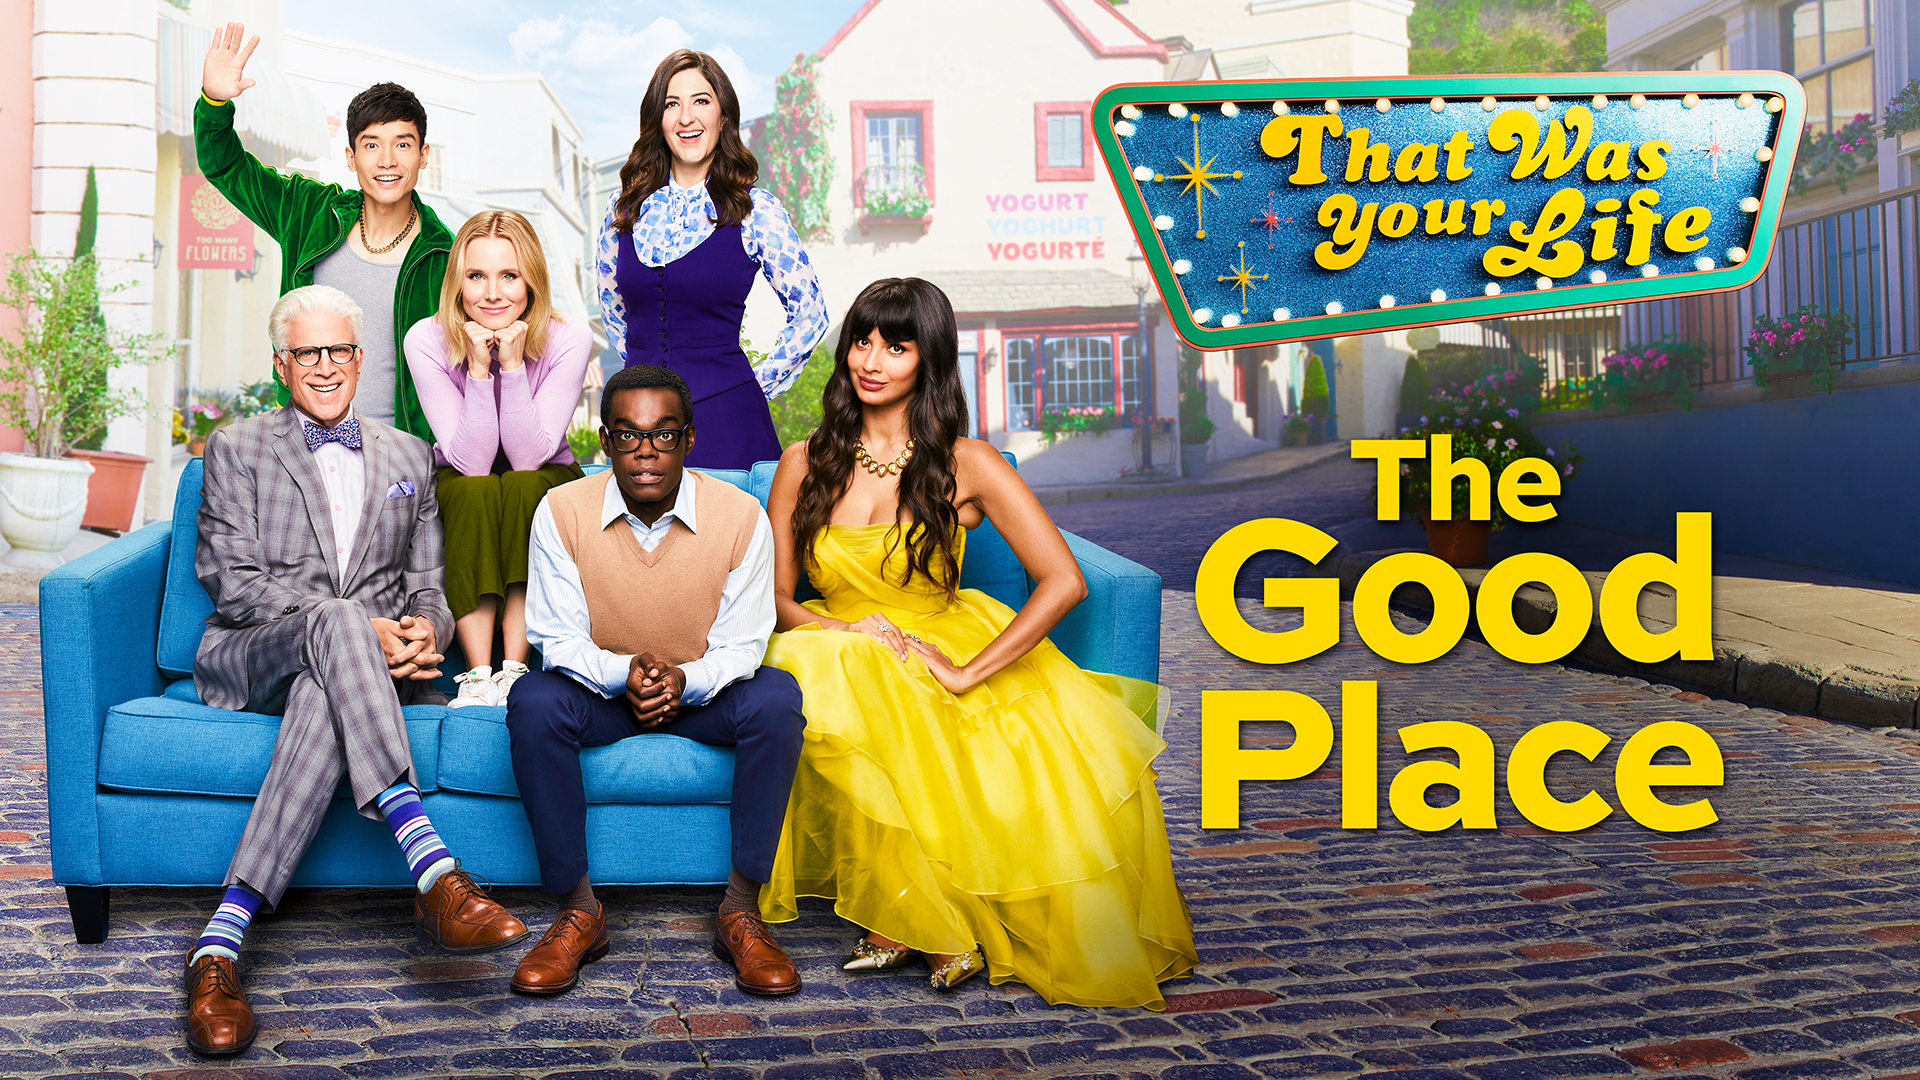 Watch The Good Place Episodes at NBC.com1920 x 1080